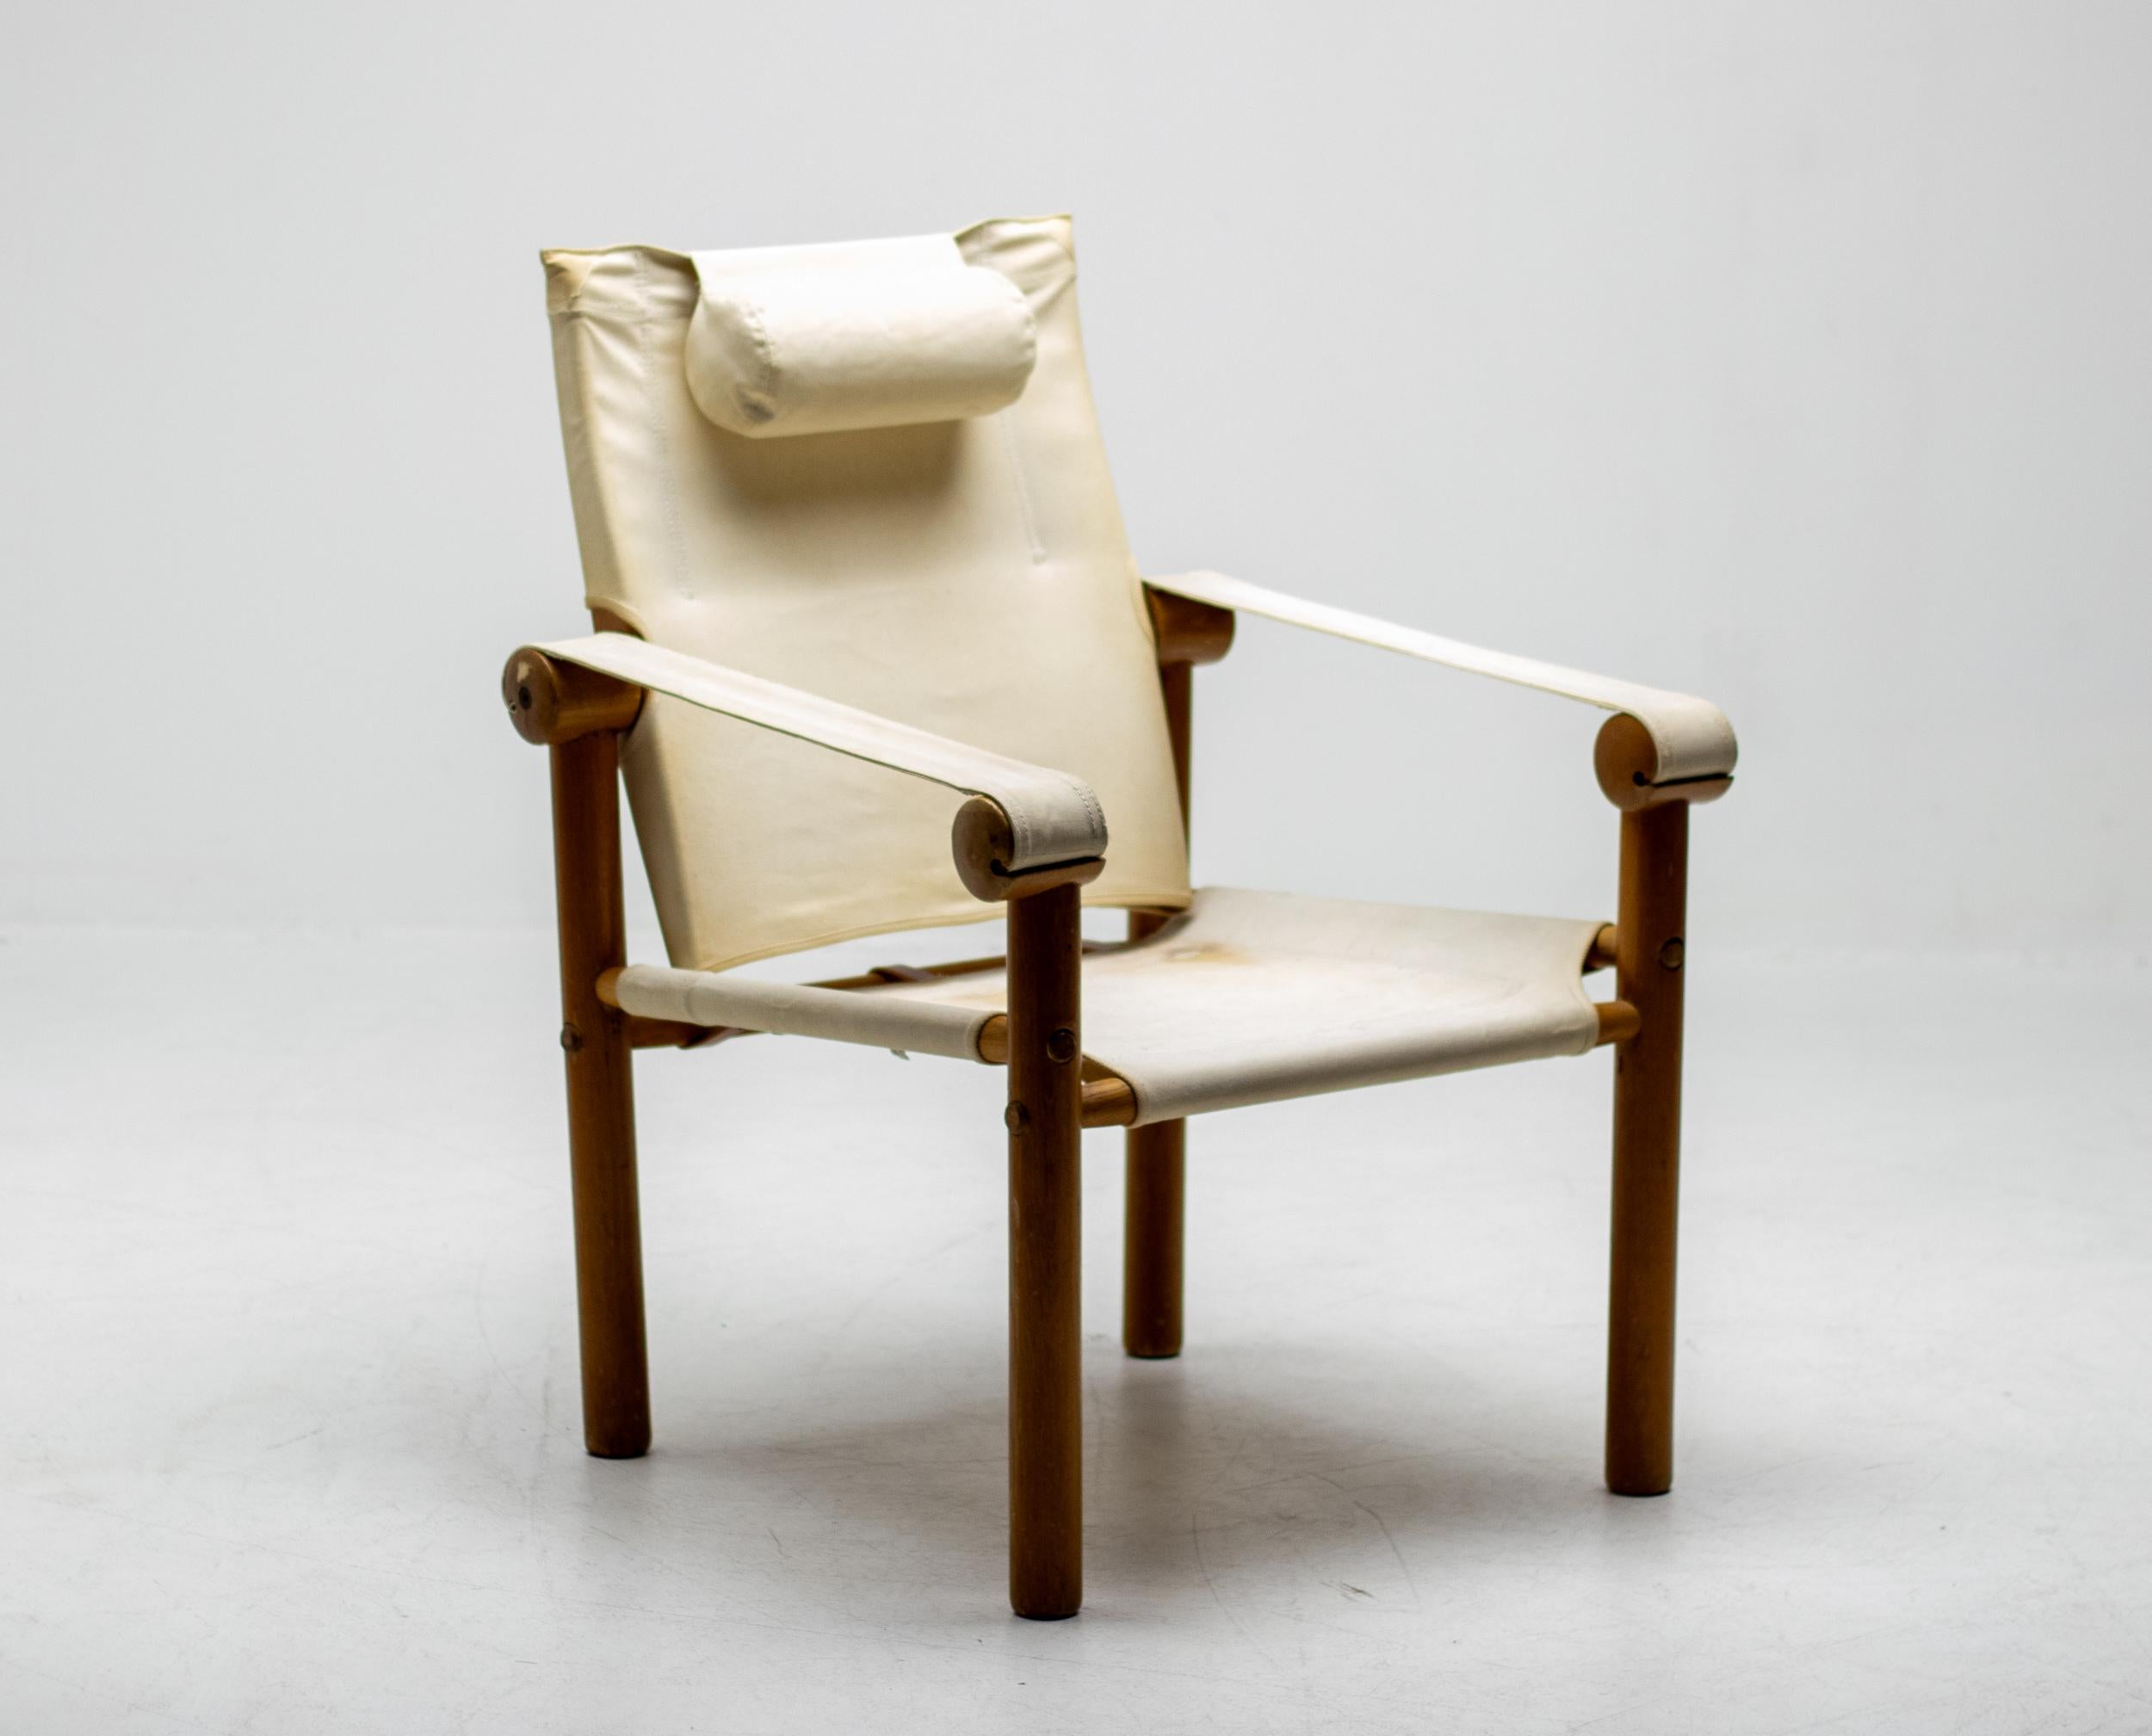 Exceptionally rare 1970s lounge chair in ash and canvas made by Zanotta.
The chair is very solid and disassembles completely when desired.
In wonderful vintage condition. All leather belts were totally dried out and have been replaced beholding the